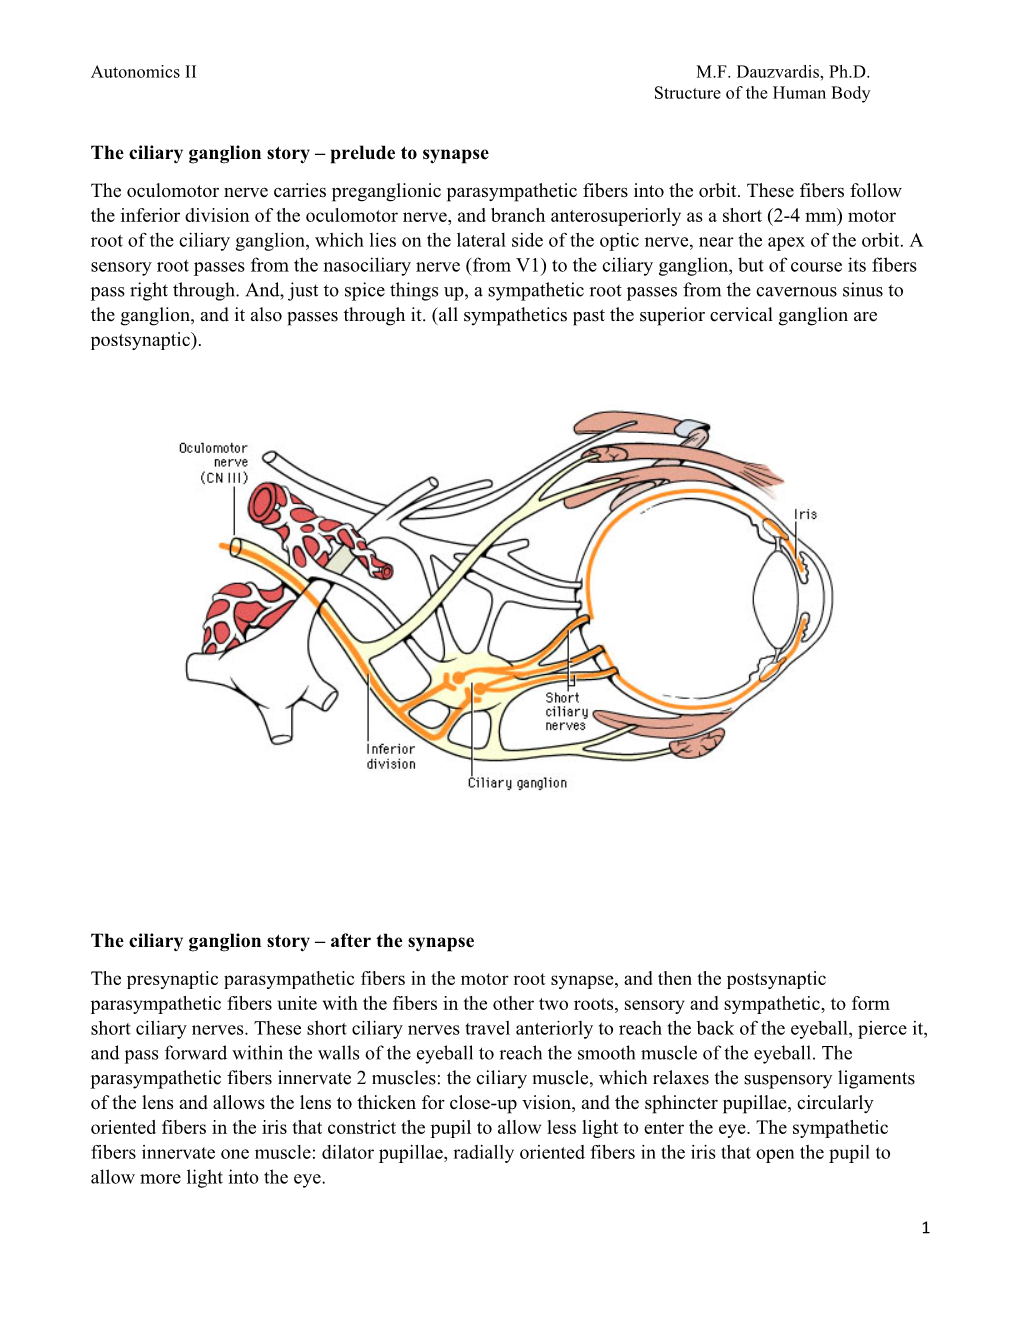 The Ciliary Ganglion Story – Prelude to Synapse the Oculomotor Nerve Carries Preganglionic Parasympathetic Fibers Into the Orbit